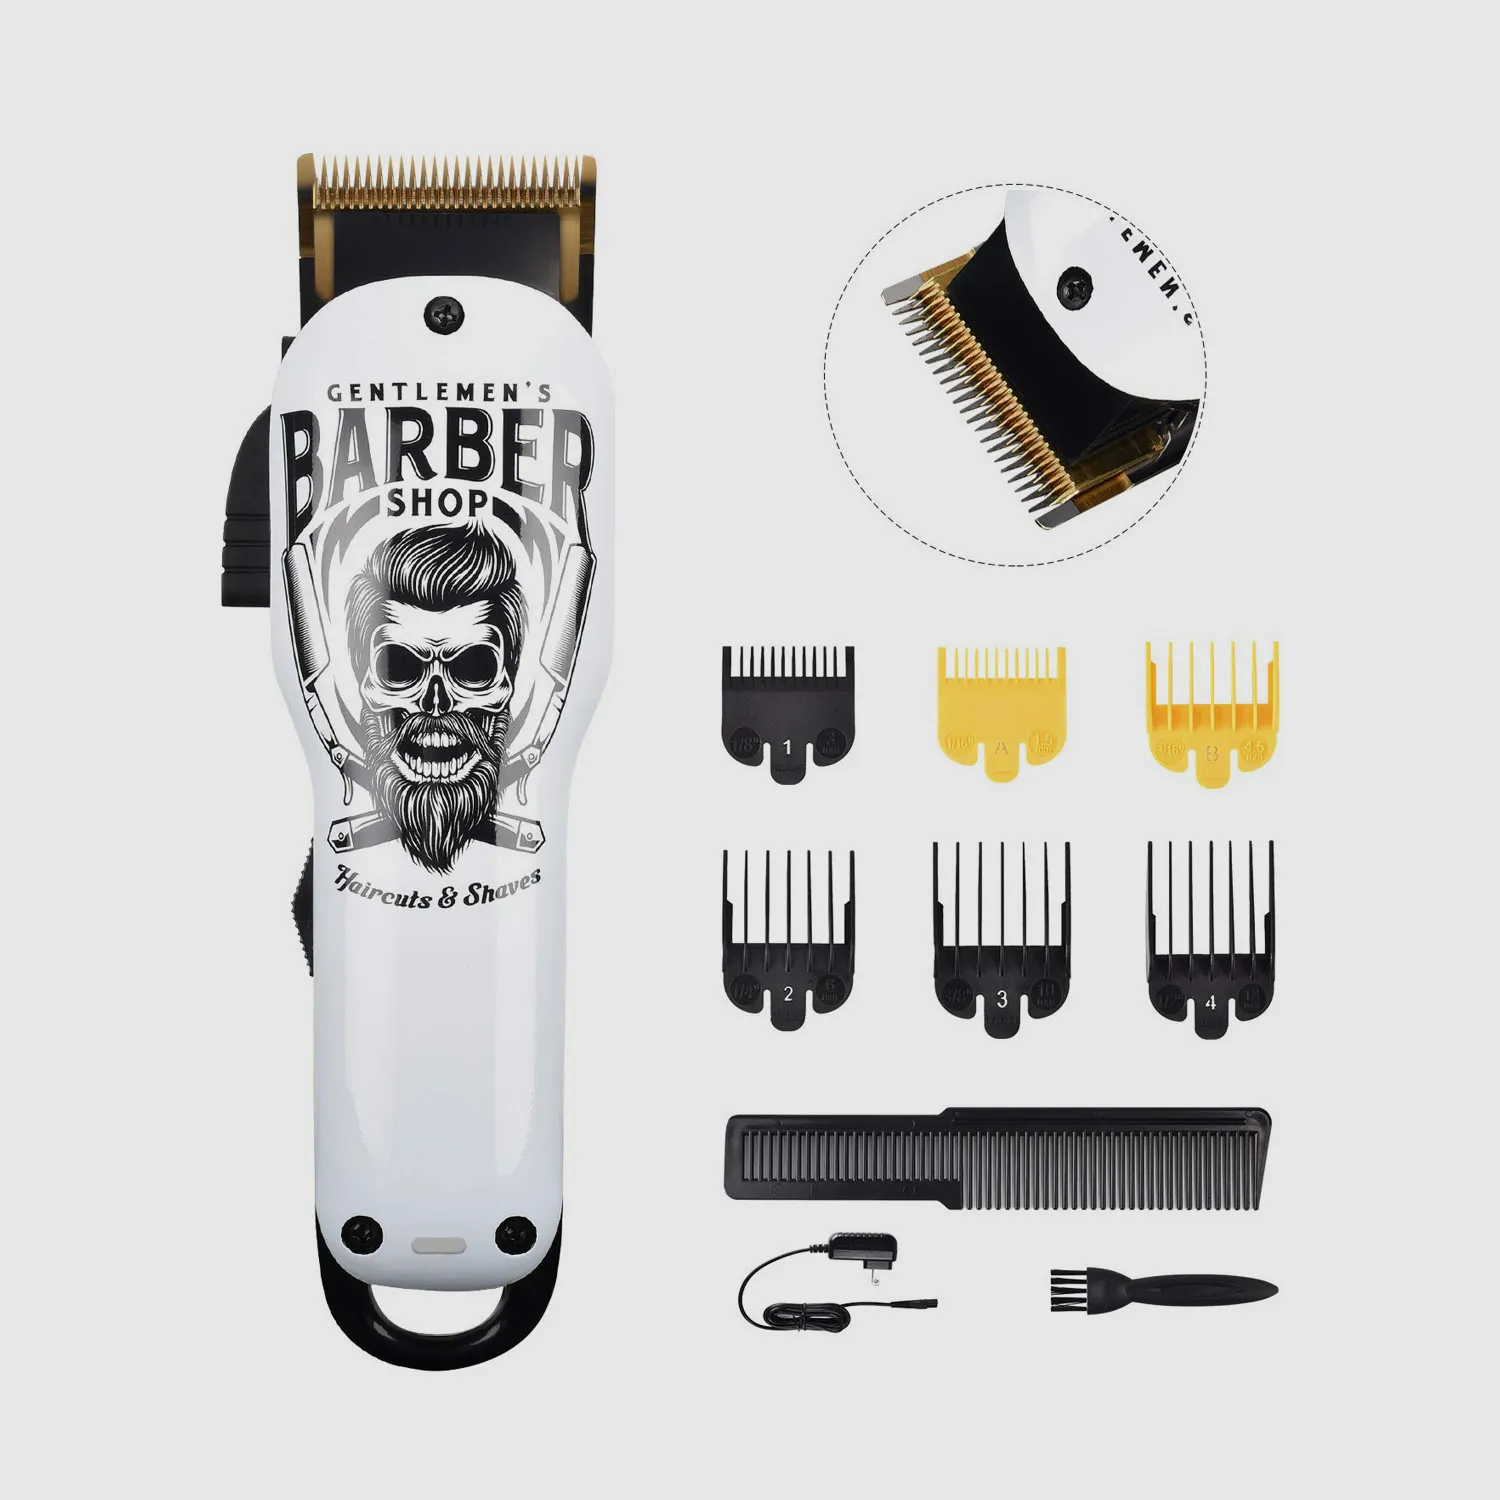 Hair clippers vs. beard trimmers 